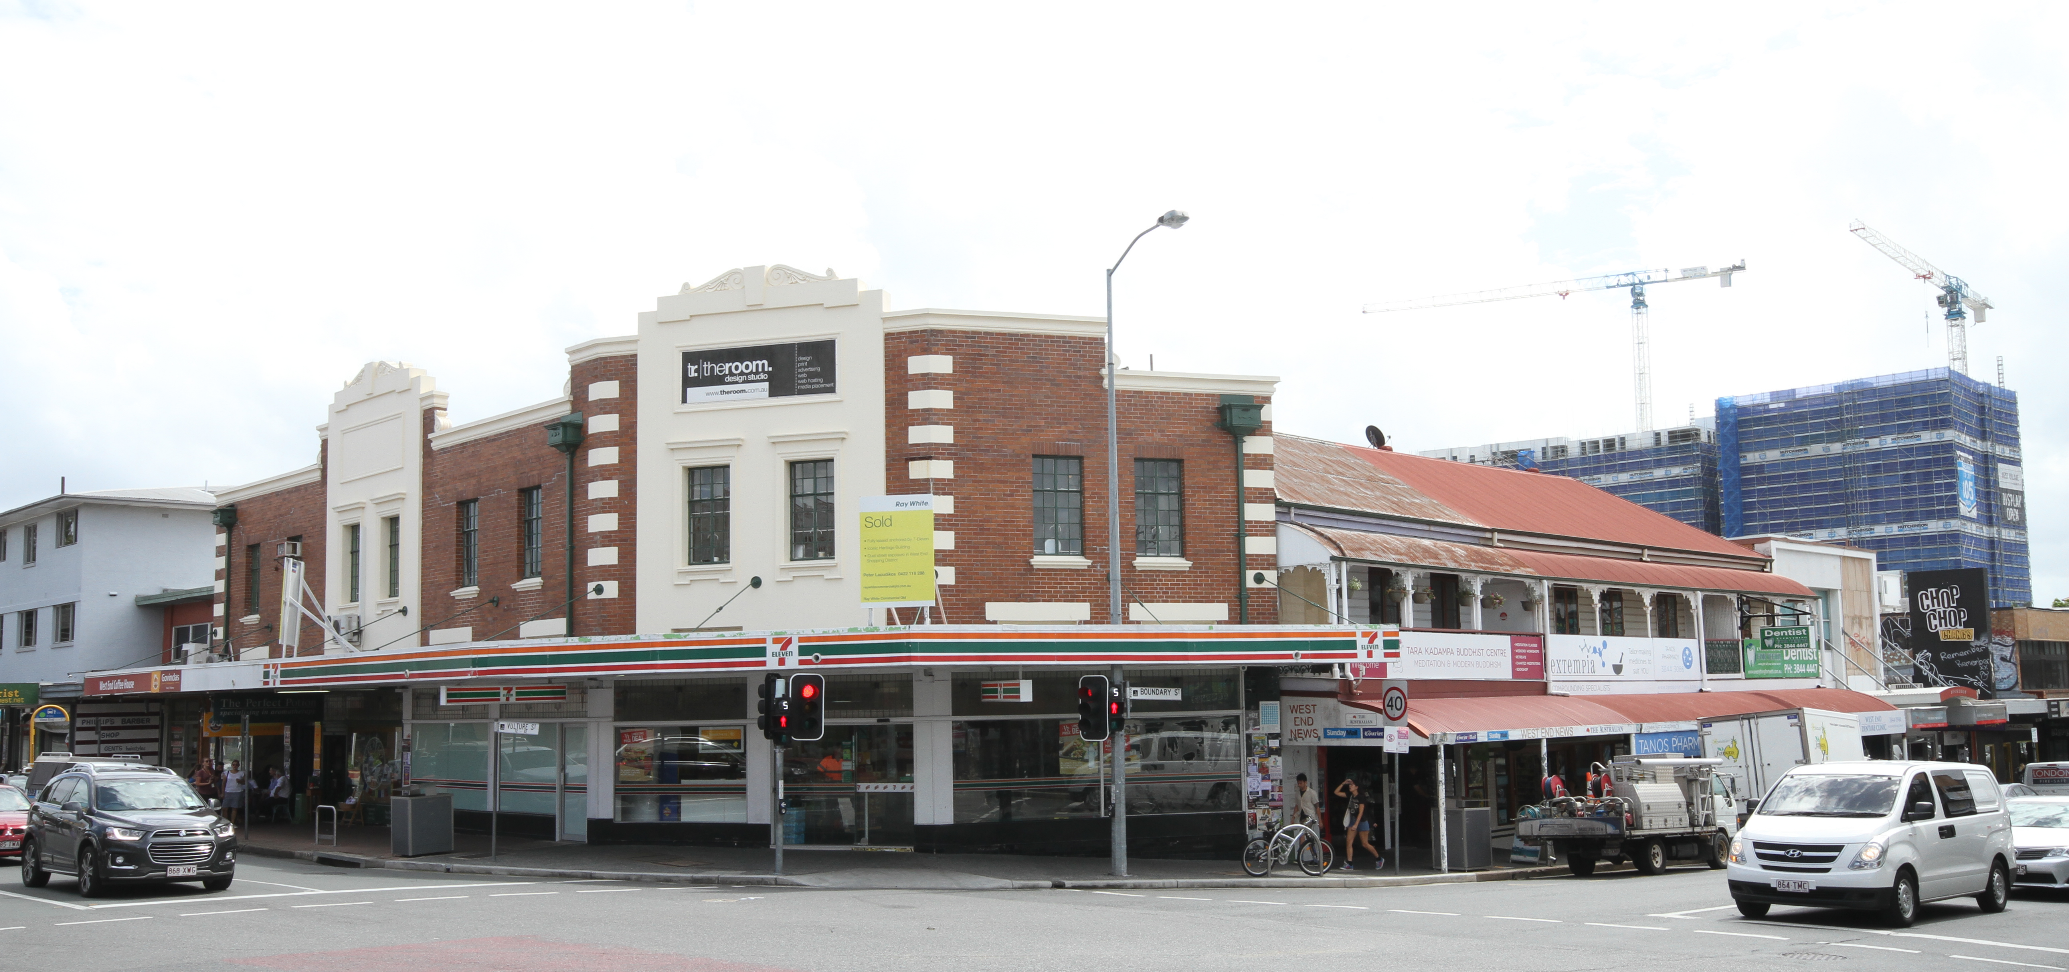 This is an image of the local heritage place known as Row of Shops (197 to 201 Boundary Street, West End)